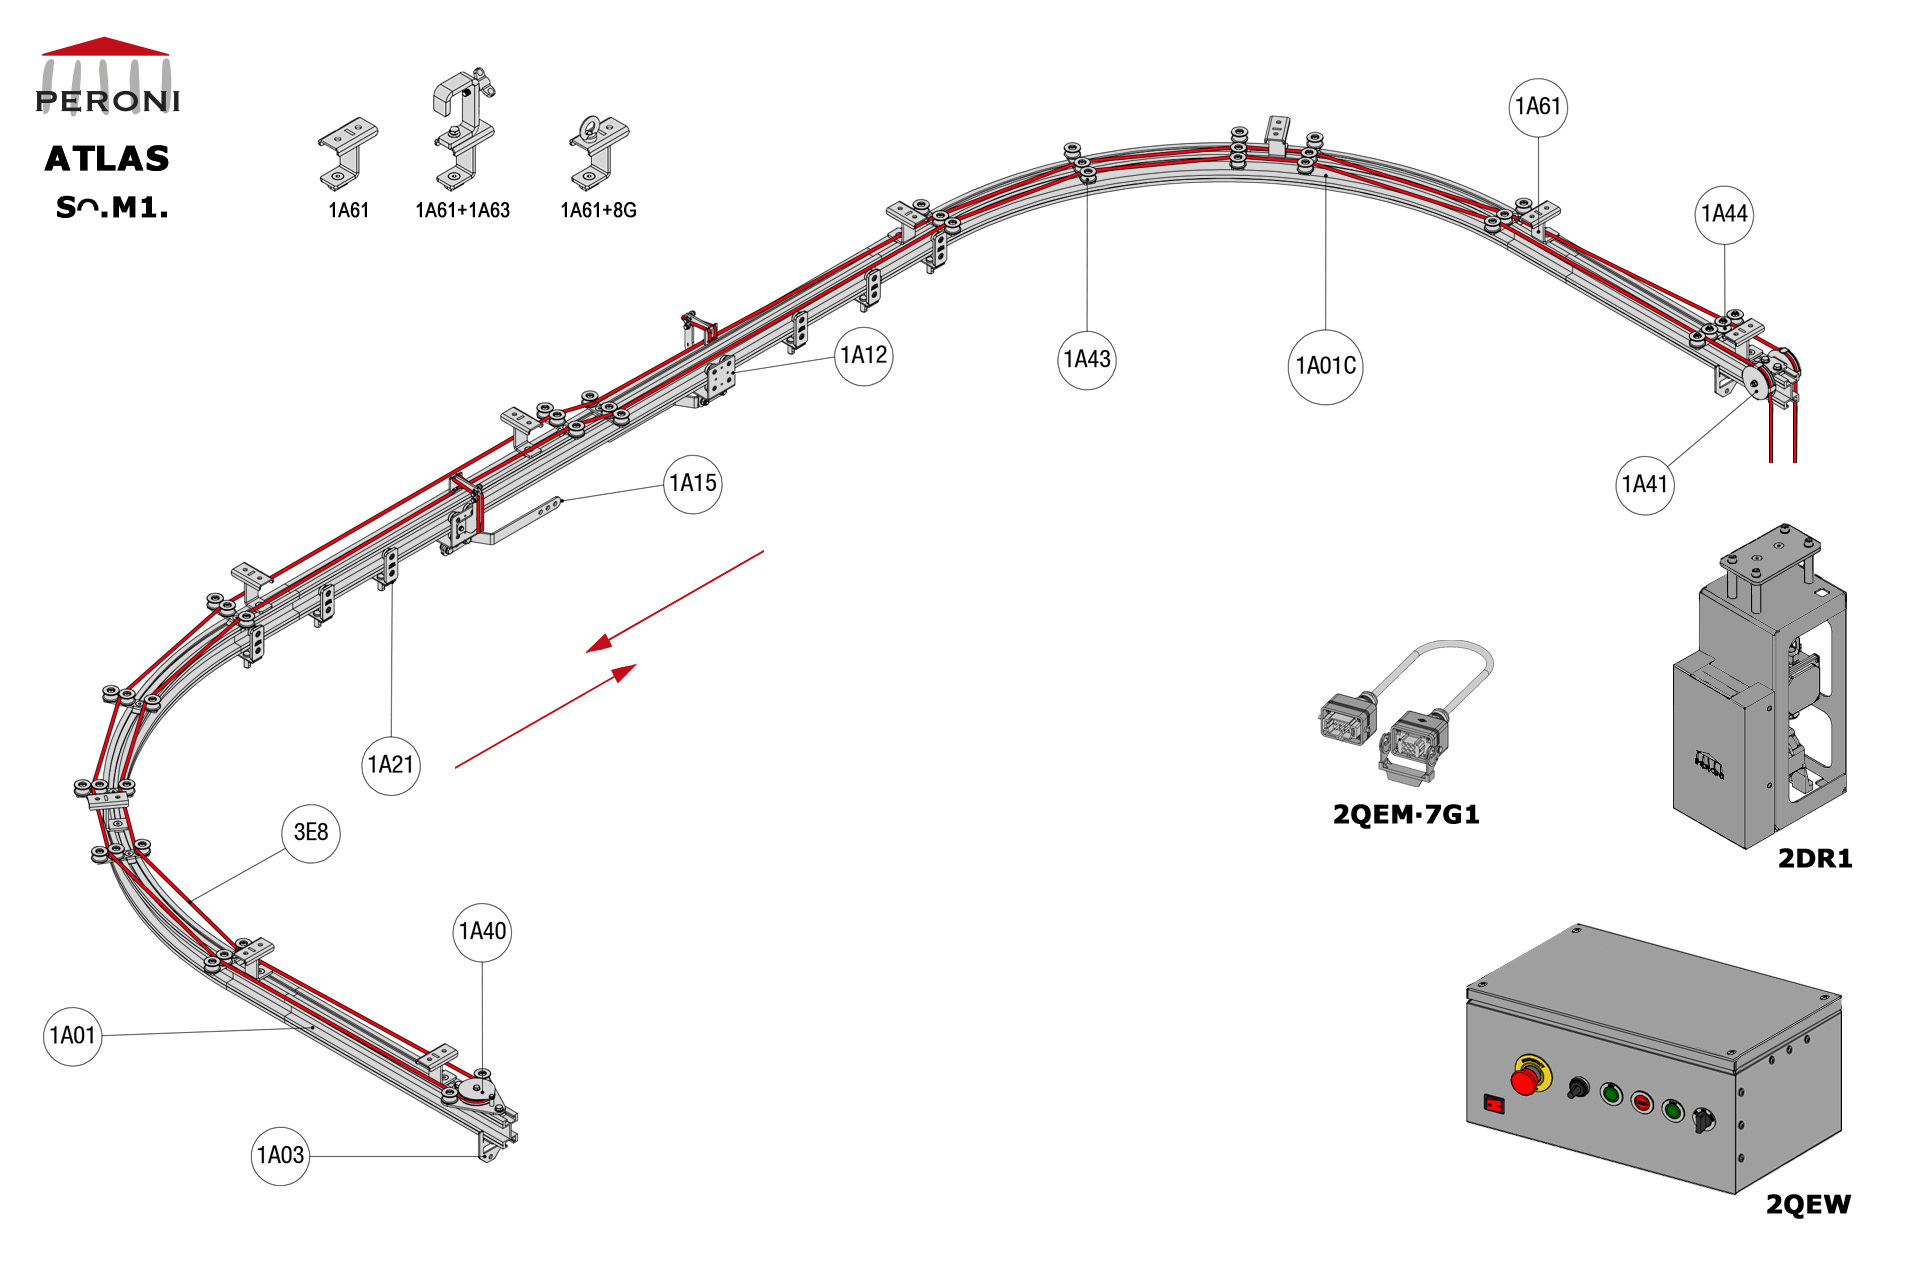 Sᴖ.M1. configuration track Sᴖ. Curved single rail central openingM1. Motorizedup to 50 cm central overlapComponenti 1A01 - Straight rail1A01C - Curved rail1A02 - Connection set1A03 - End stop1A12 - Top cord master carrier1A15 - Overlap arm1A20 - 2 Wheel runnerMotion control1A40 - Return pulley1A41 - Head double pulley1A43 - Top cord guide1A44 - Top cord aligner1A70 - Top cord limit switch with pulley1A71 - Top cord limit switch arm1A72 - Cord guide for limit switch2DR1-RDS2QEM-7G1-152QEW - W panel board 3E - Poly rope  8 mm